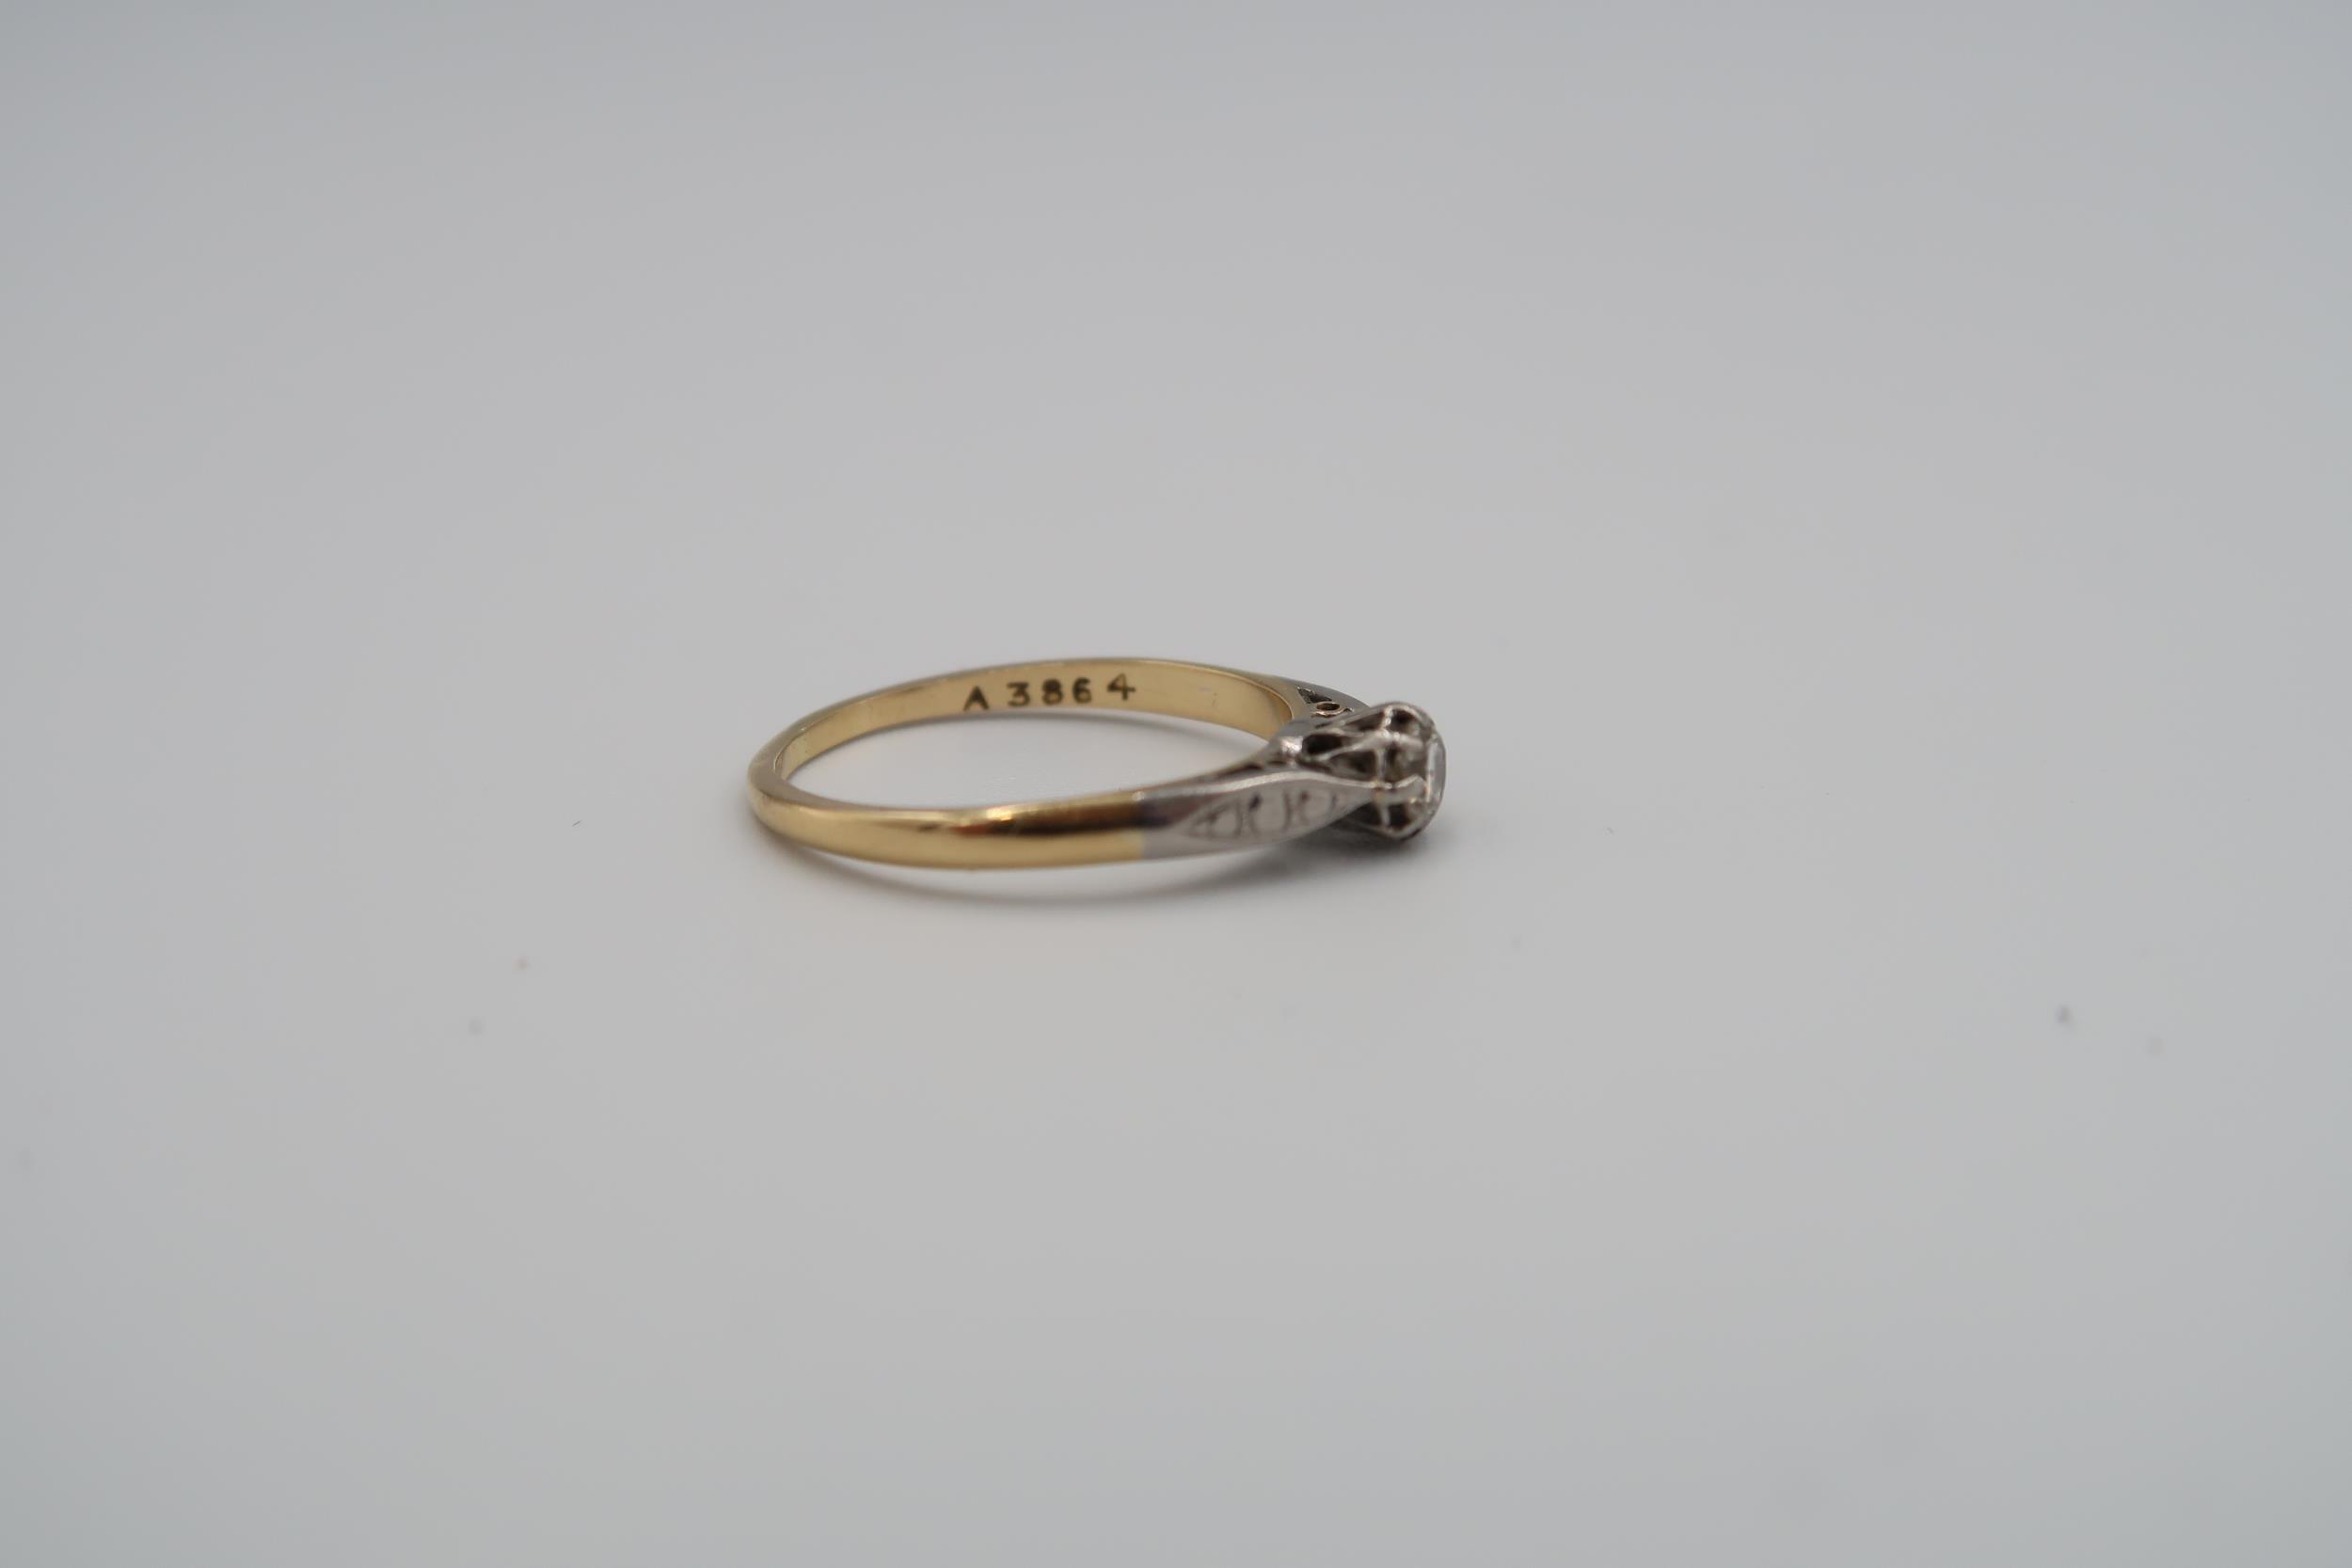 An 18ct gold and platinum ring with approx 0.15ct diamond to shoulder - approx weight 2.35 grams - Image 2 of 3